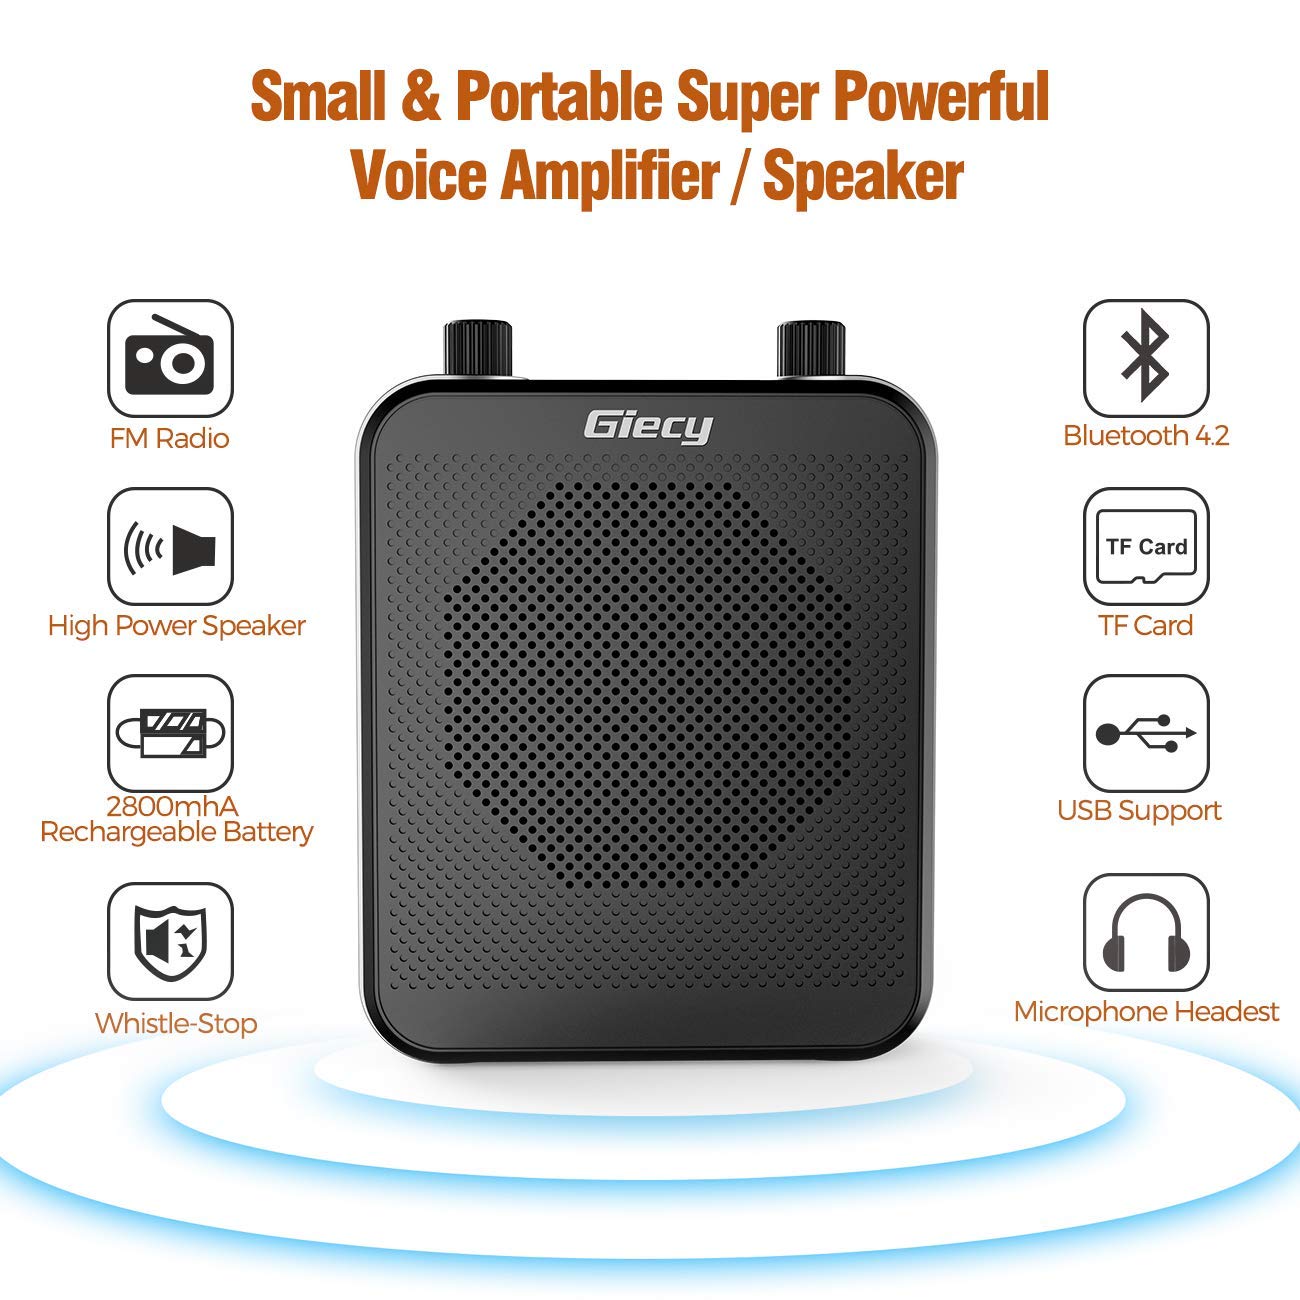 Giecy Voice Amplifier Portable Bluetooth 30W 2800mAh Rechargeable PA System Speaker for Multiple Locations Such as Classroom, Meetings and Outdoors（black/yellow/red）